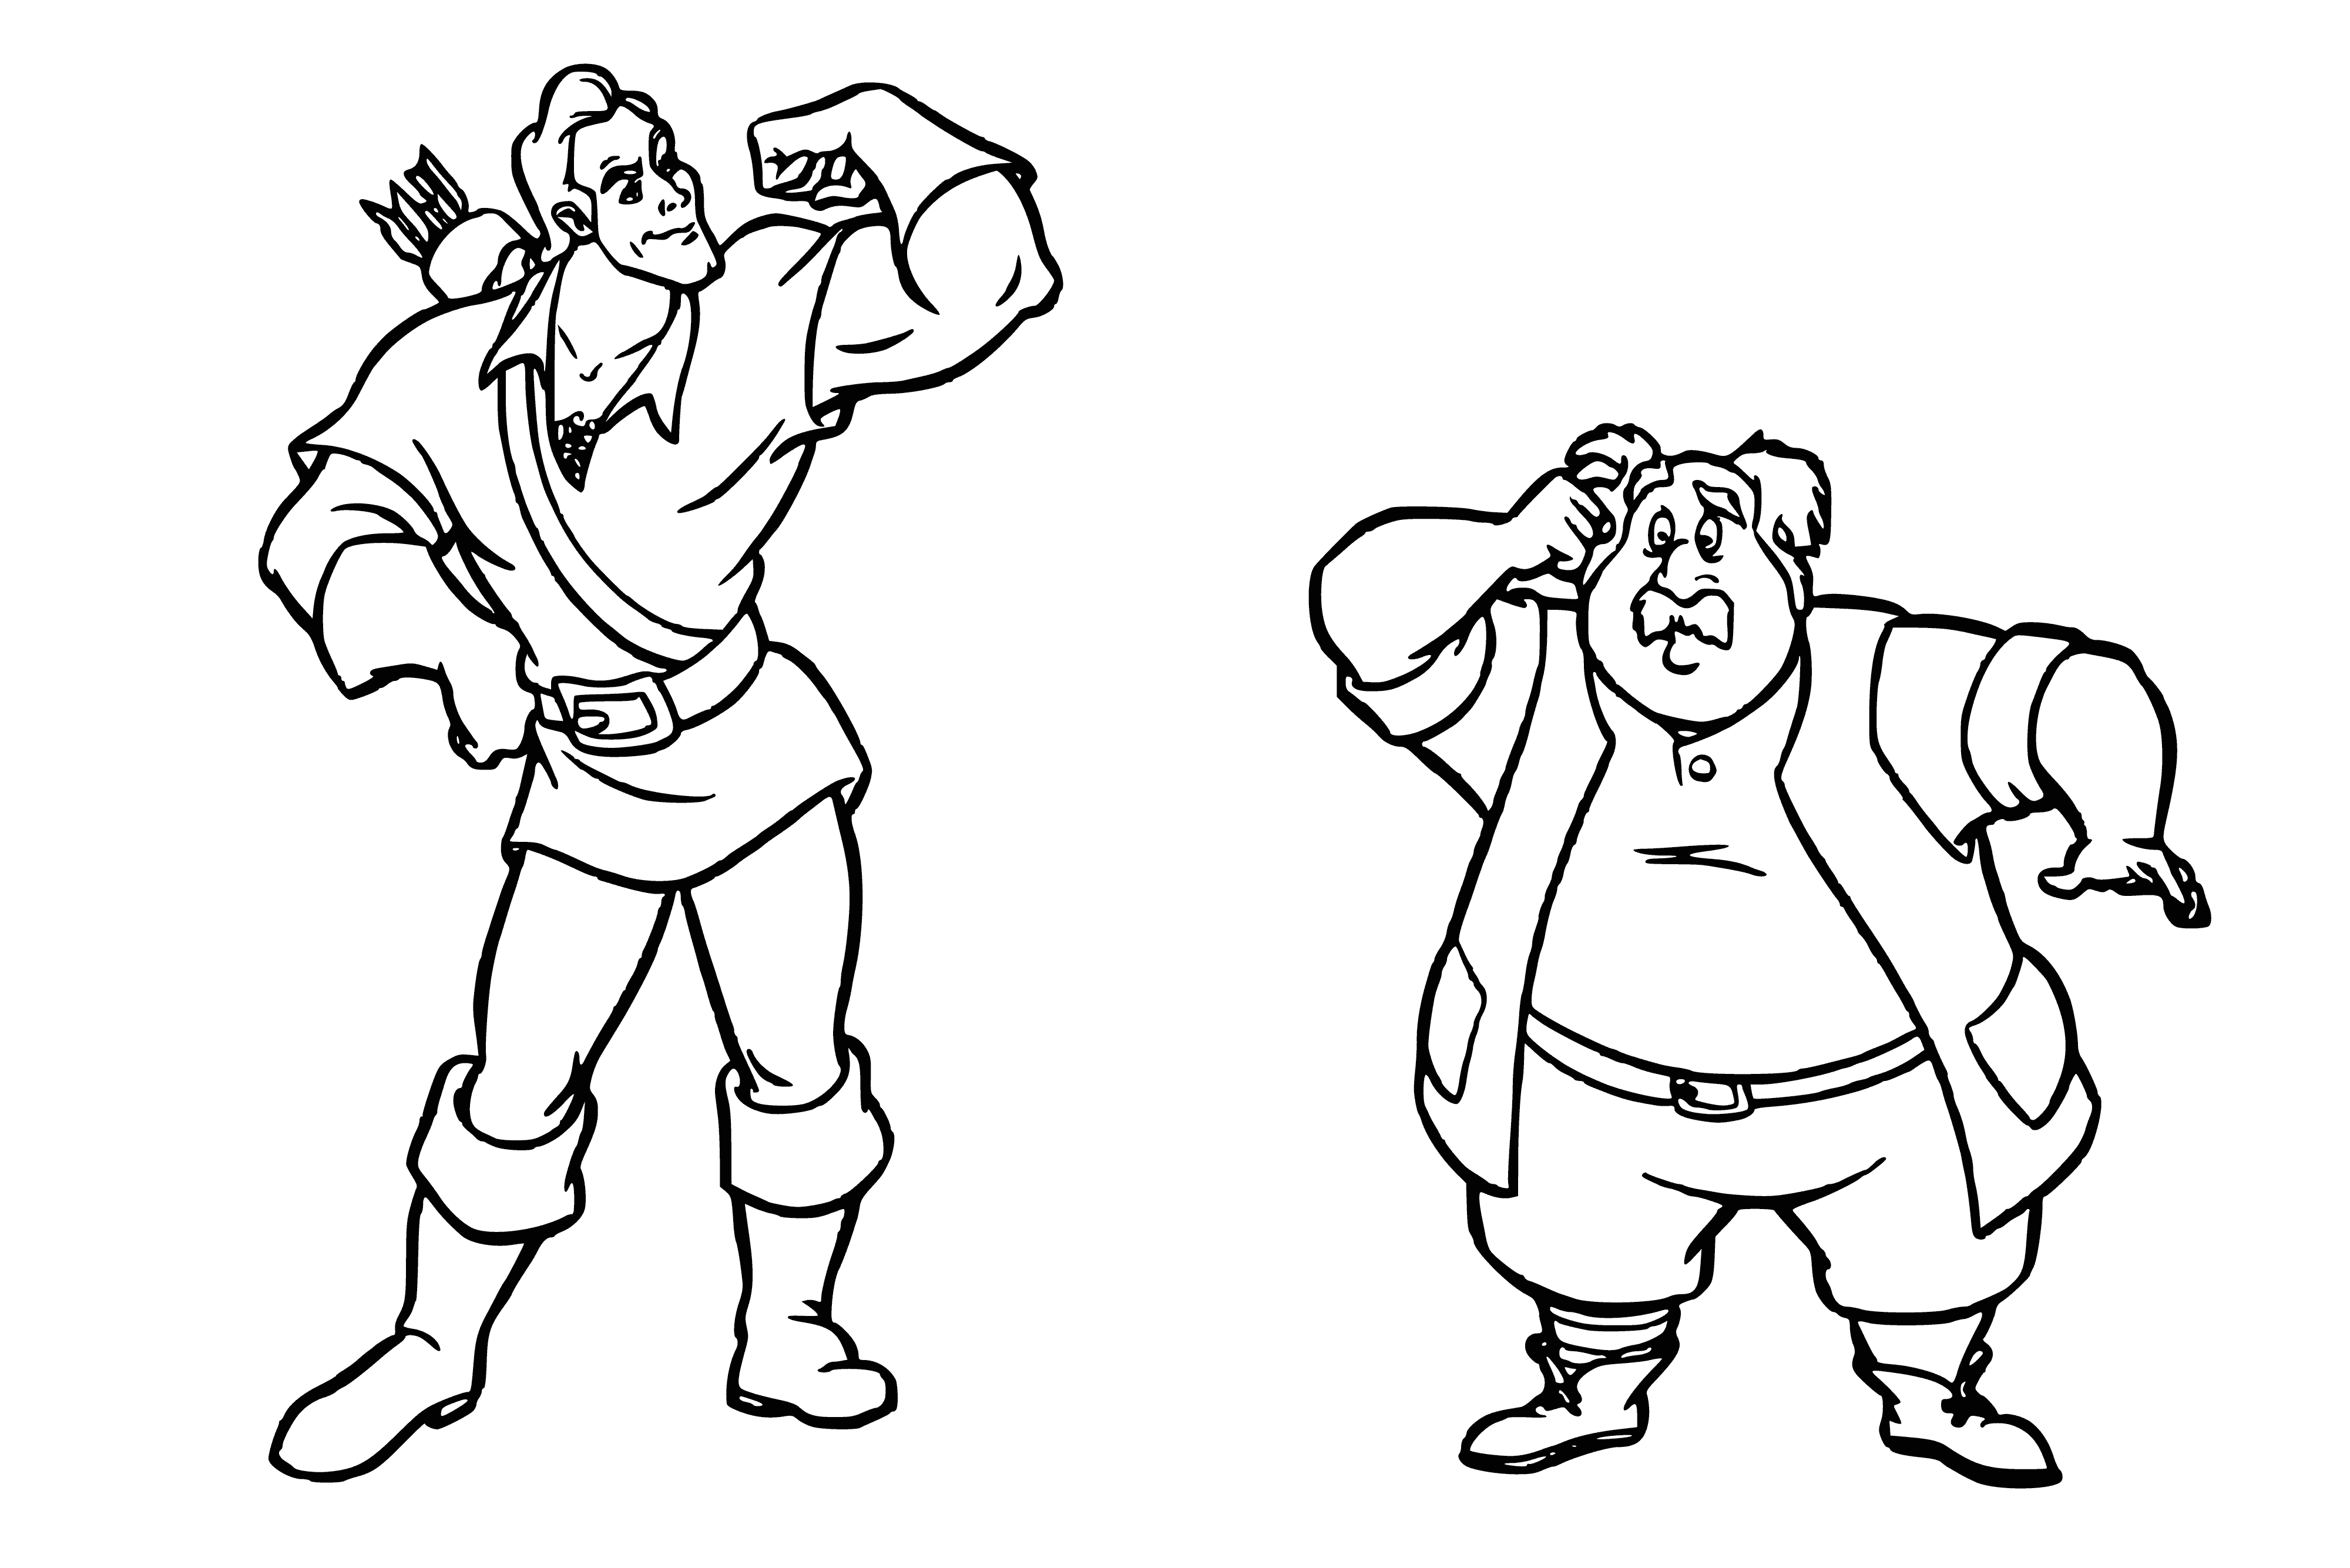 Gaston and Maurice coloring page